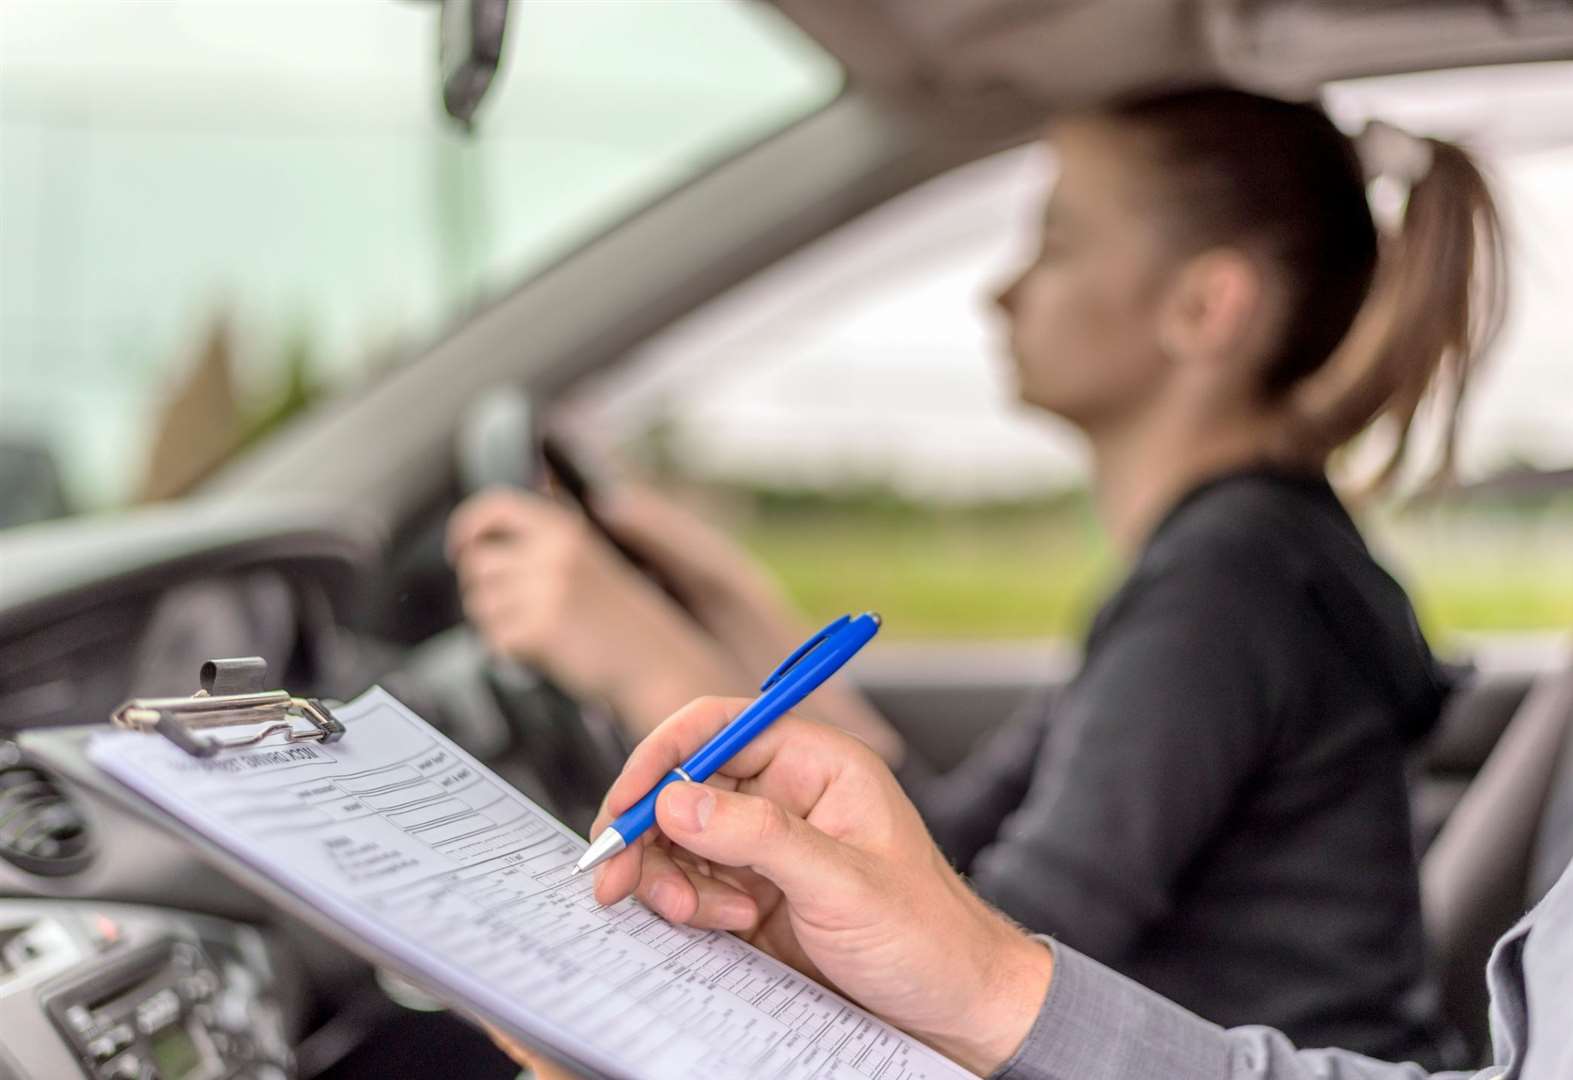 Giving learner drivers limits after passing could improve safety says the AA. Image: iStock.